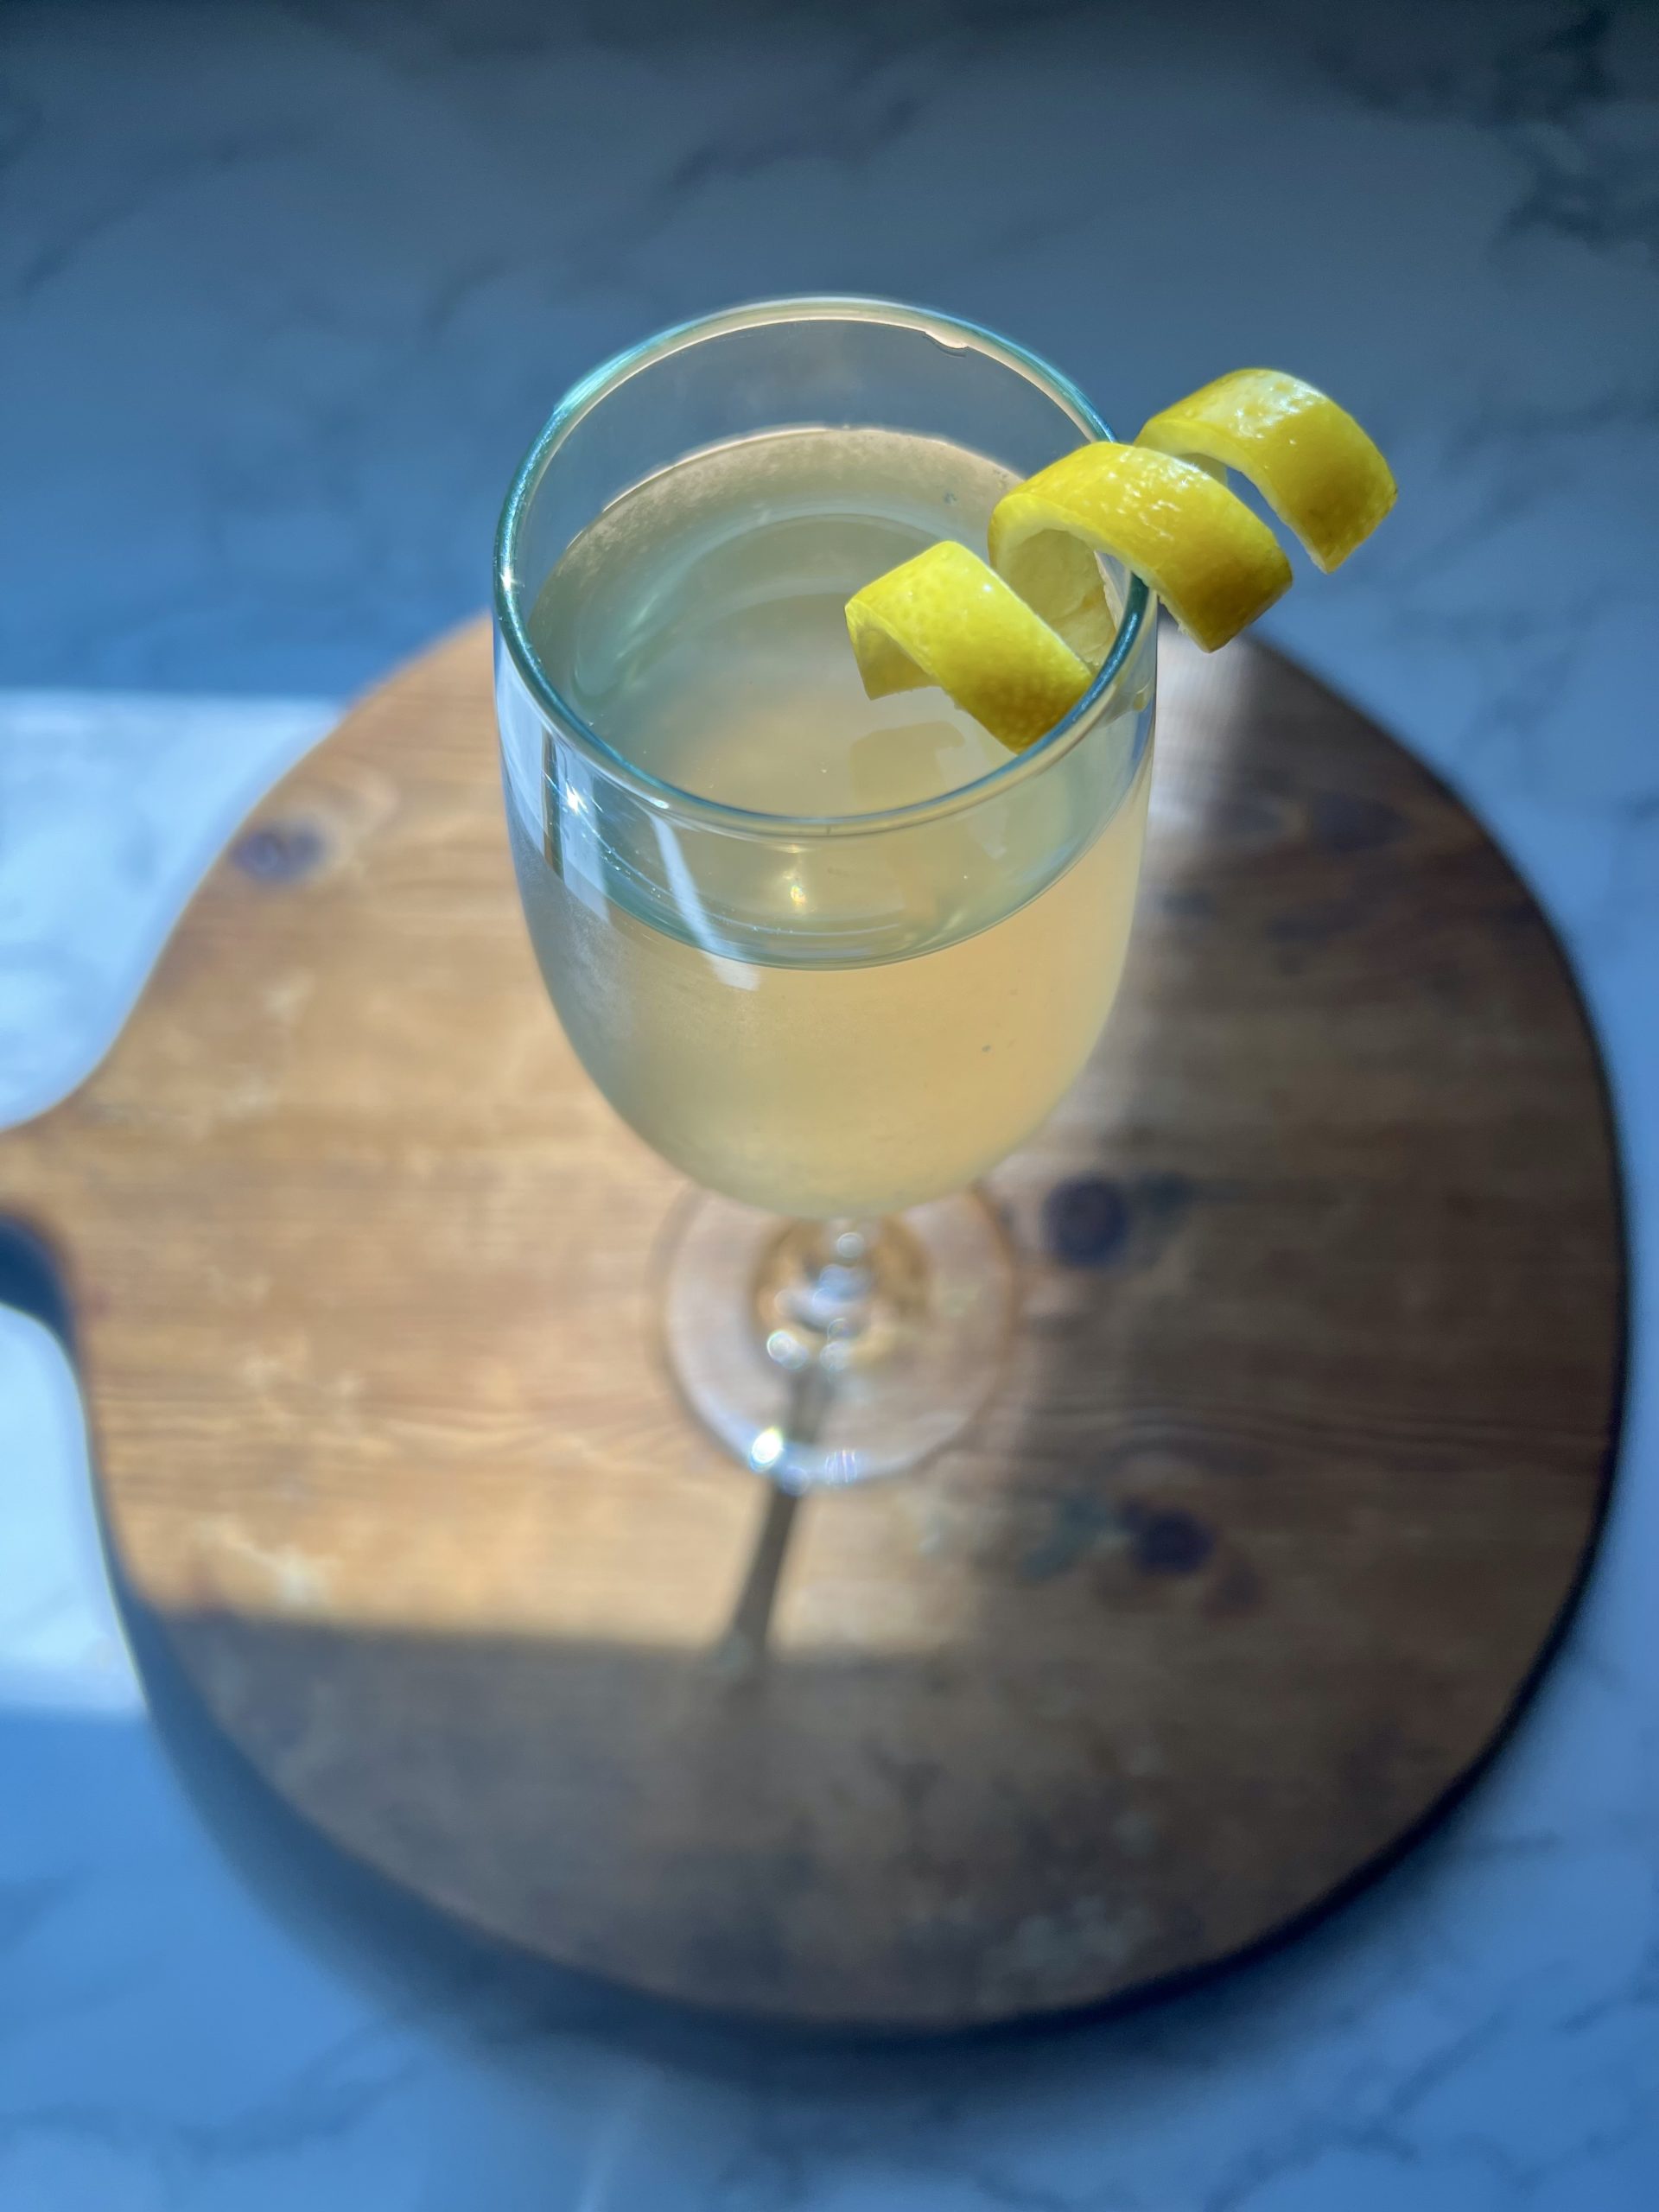 A glass of sparkling wine garnished with a lemon twist on a cutting board.